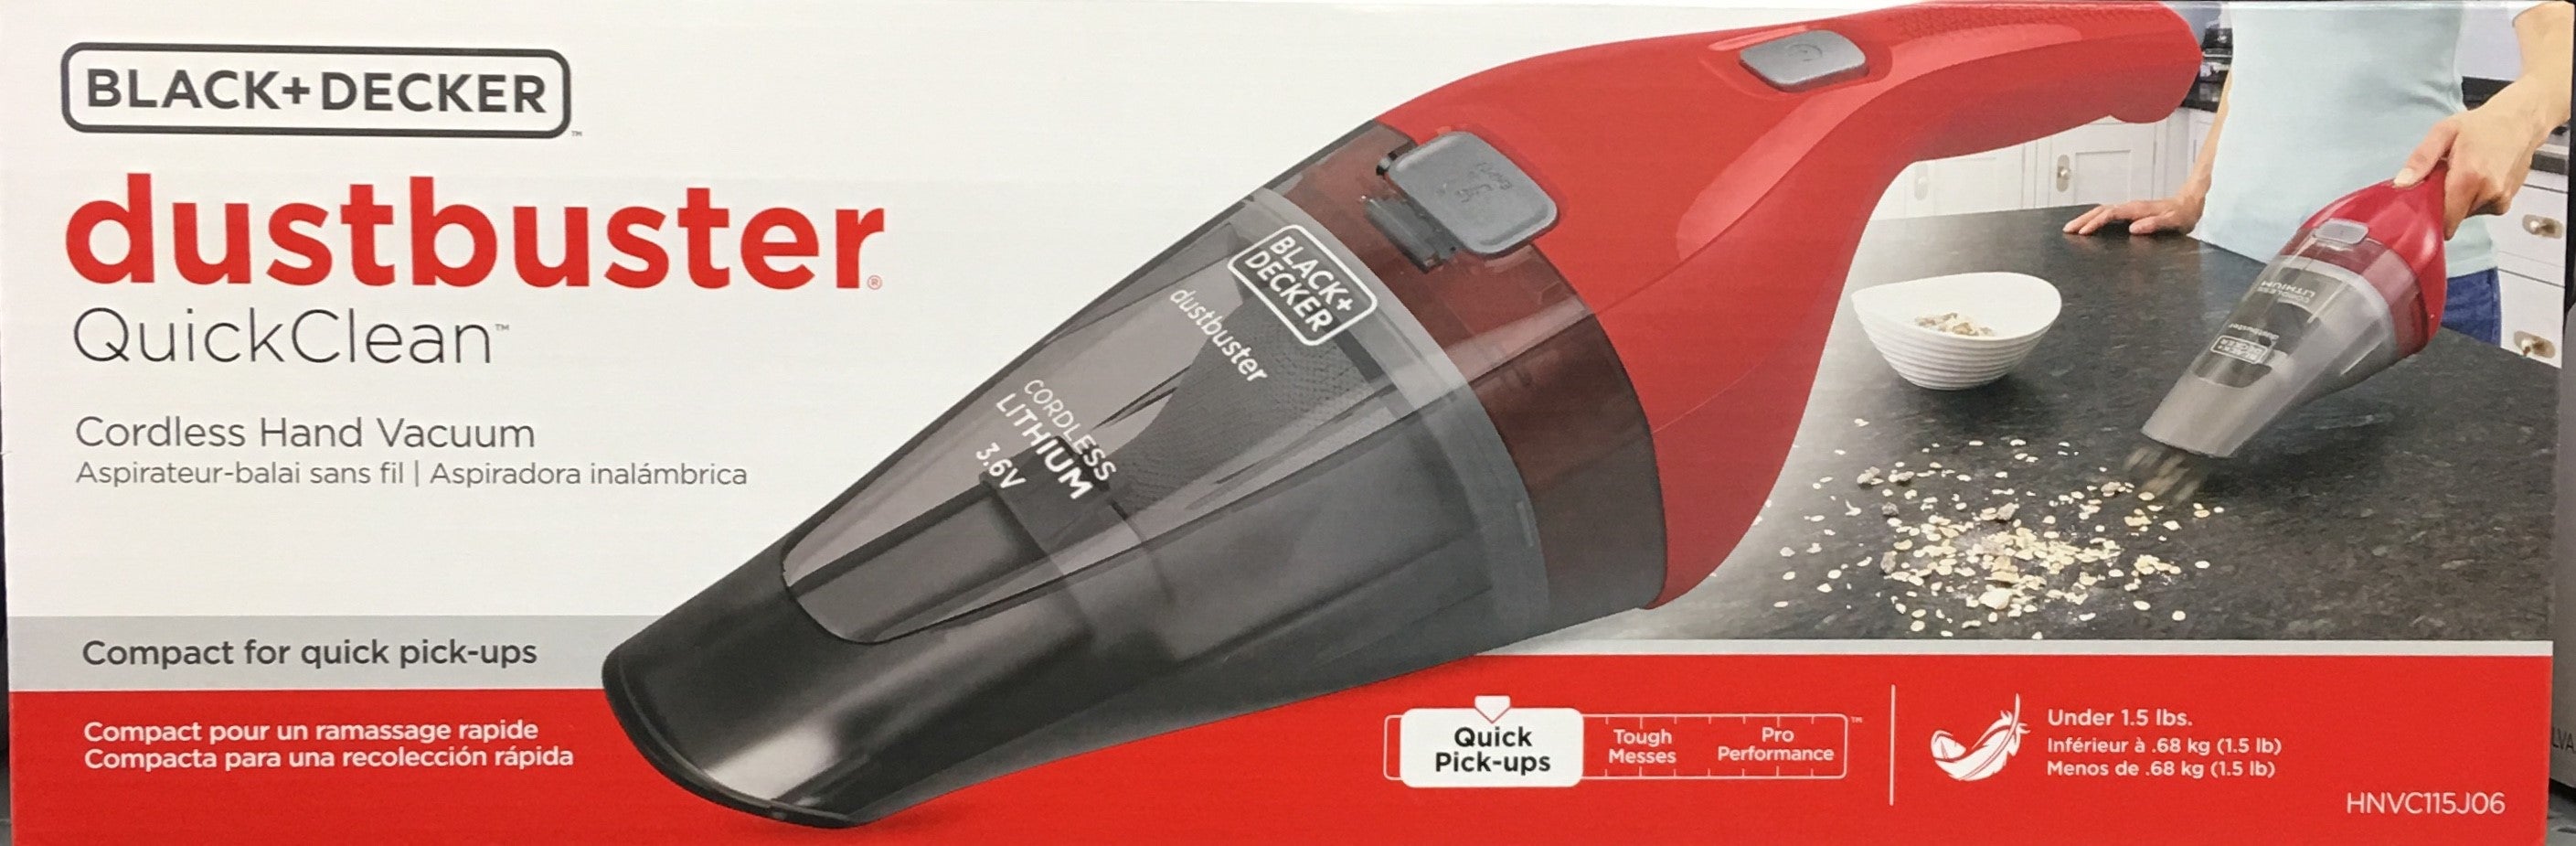 Black and Decker Dustbuster Cordless Hand Vacuum